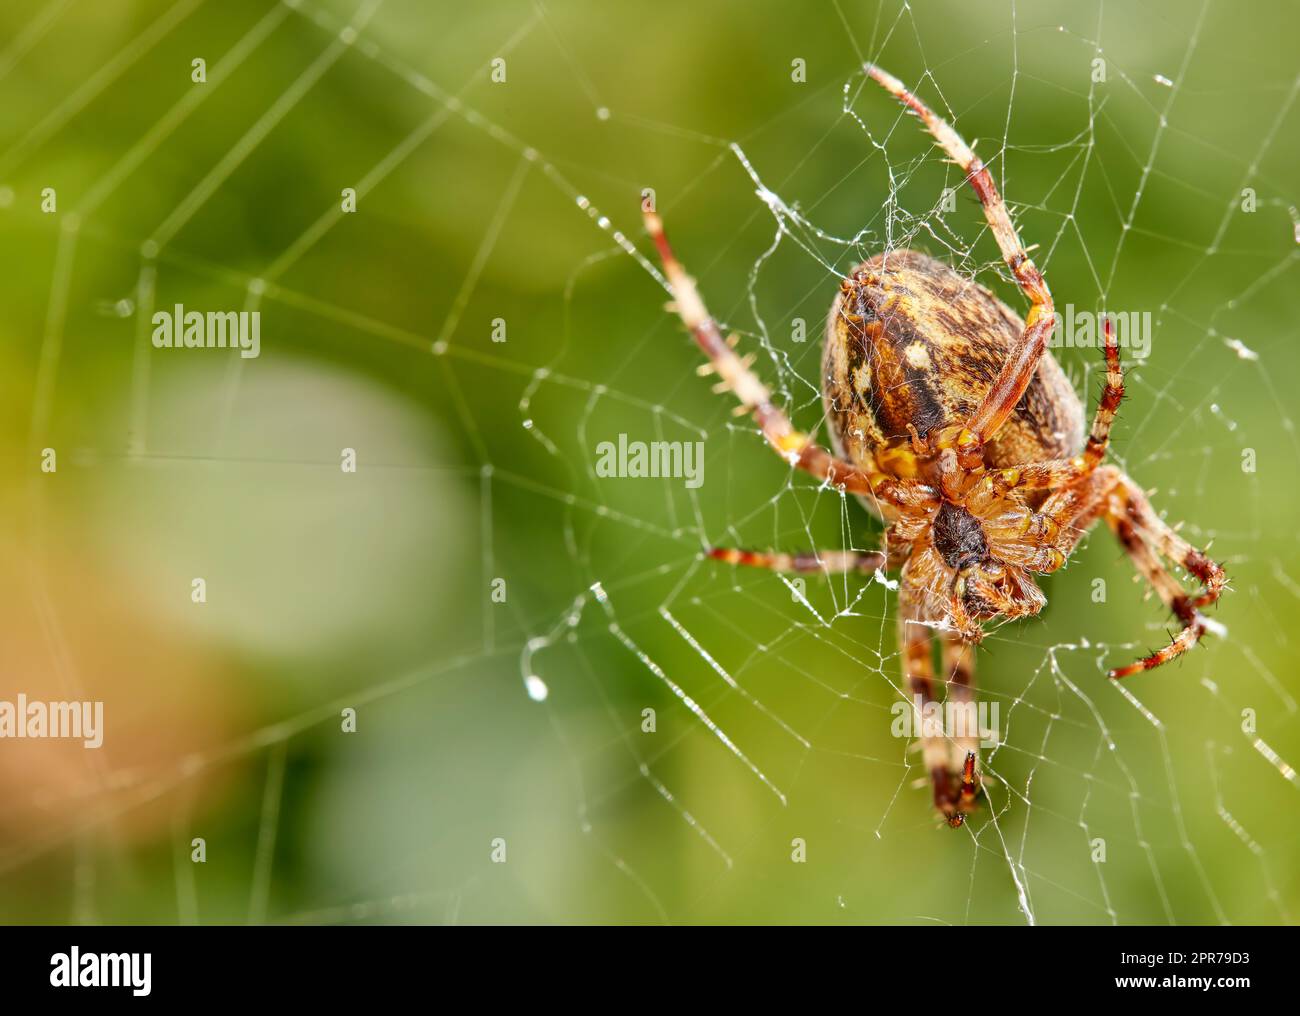 Closeup of a spider in a web against blurred leafy background. An eight legged Walnut orb weaver spider making cobweb in nature surrounded by green trees. Specimen of the species Nuctenea umbratica Stock Photo